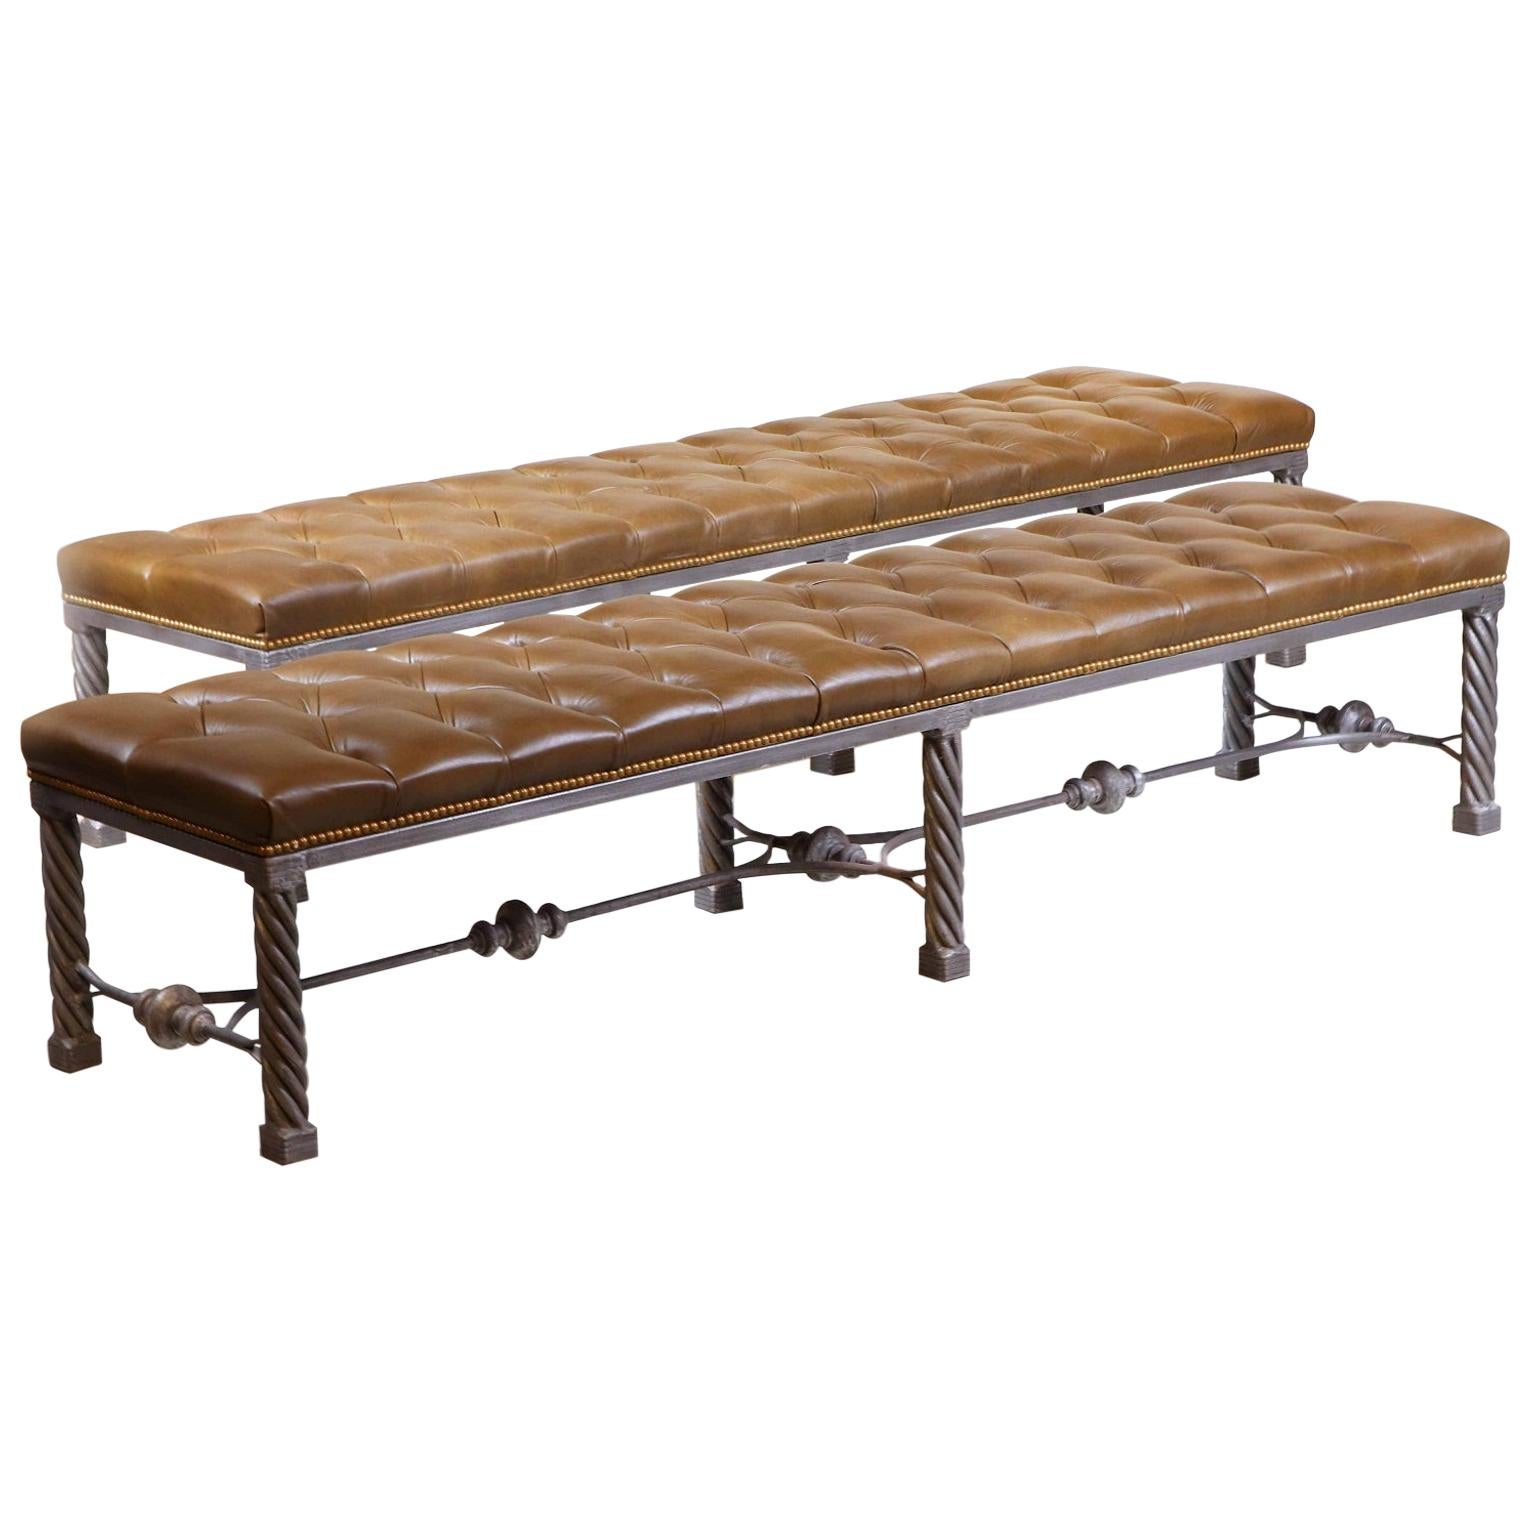 Pair of Long Modern Tufted Leather Benches